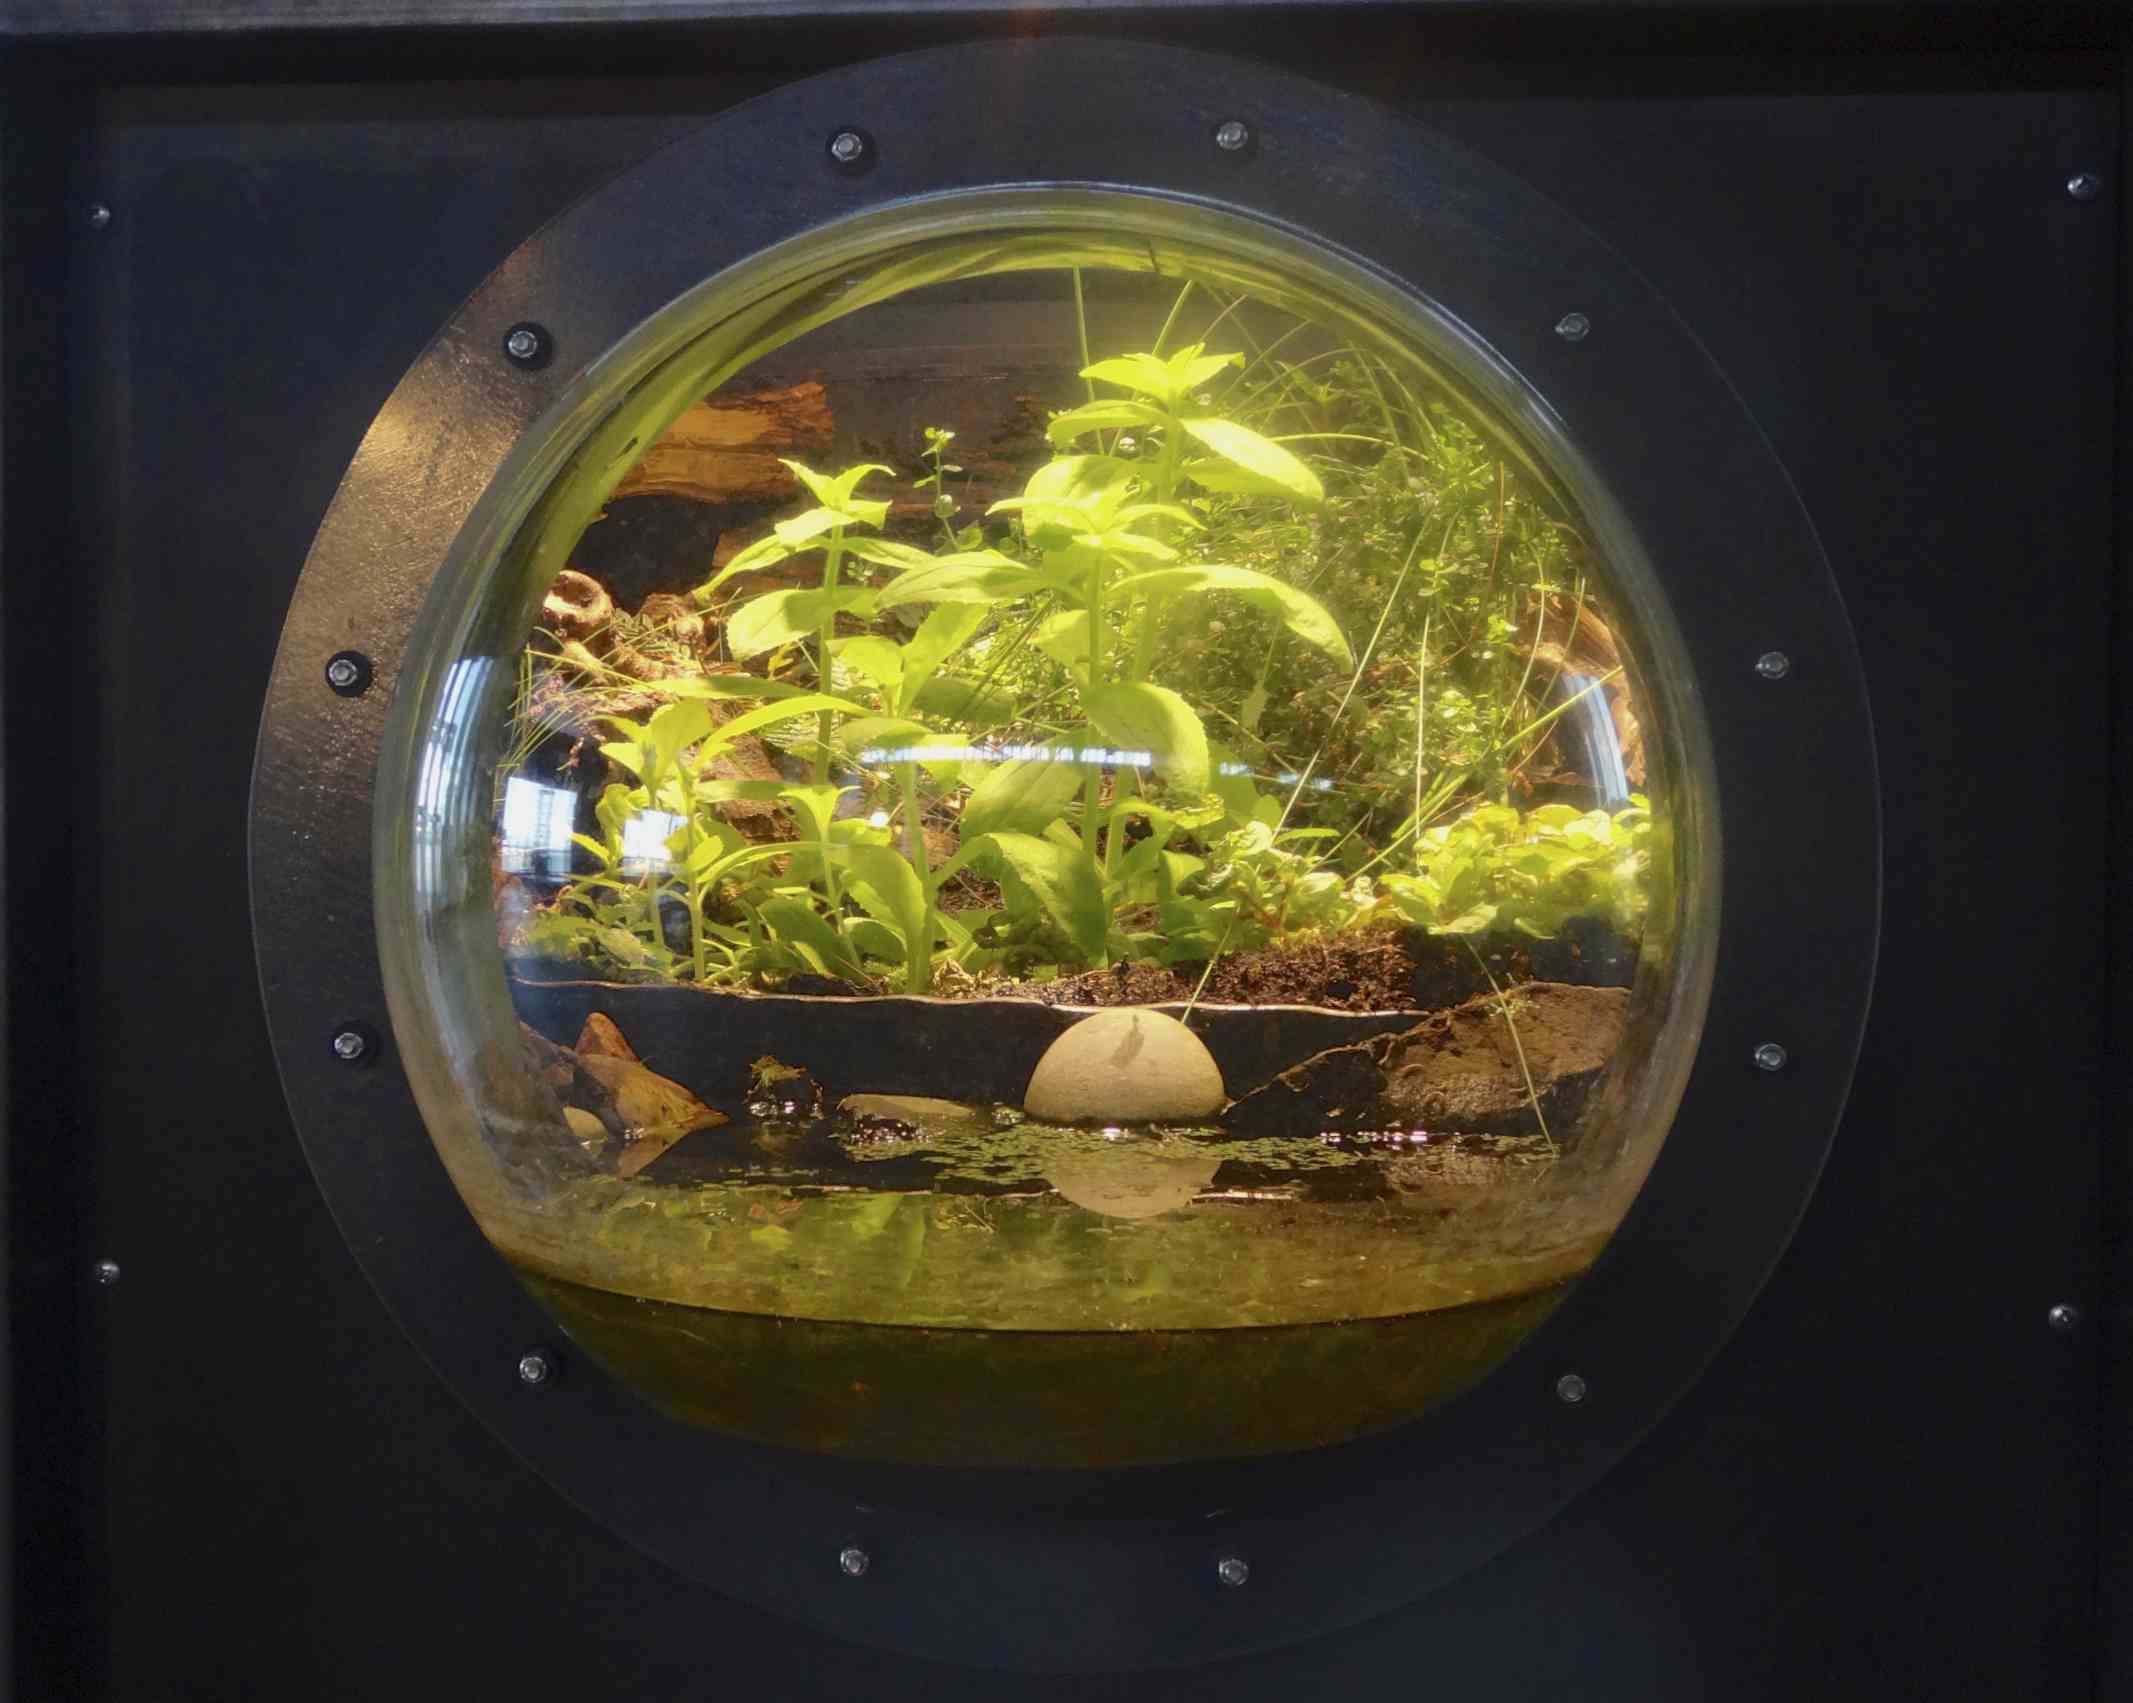 plants growing in a glass container under a light